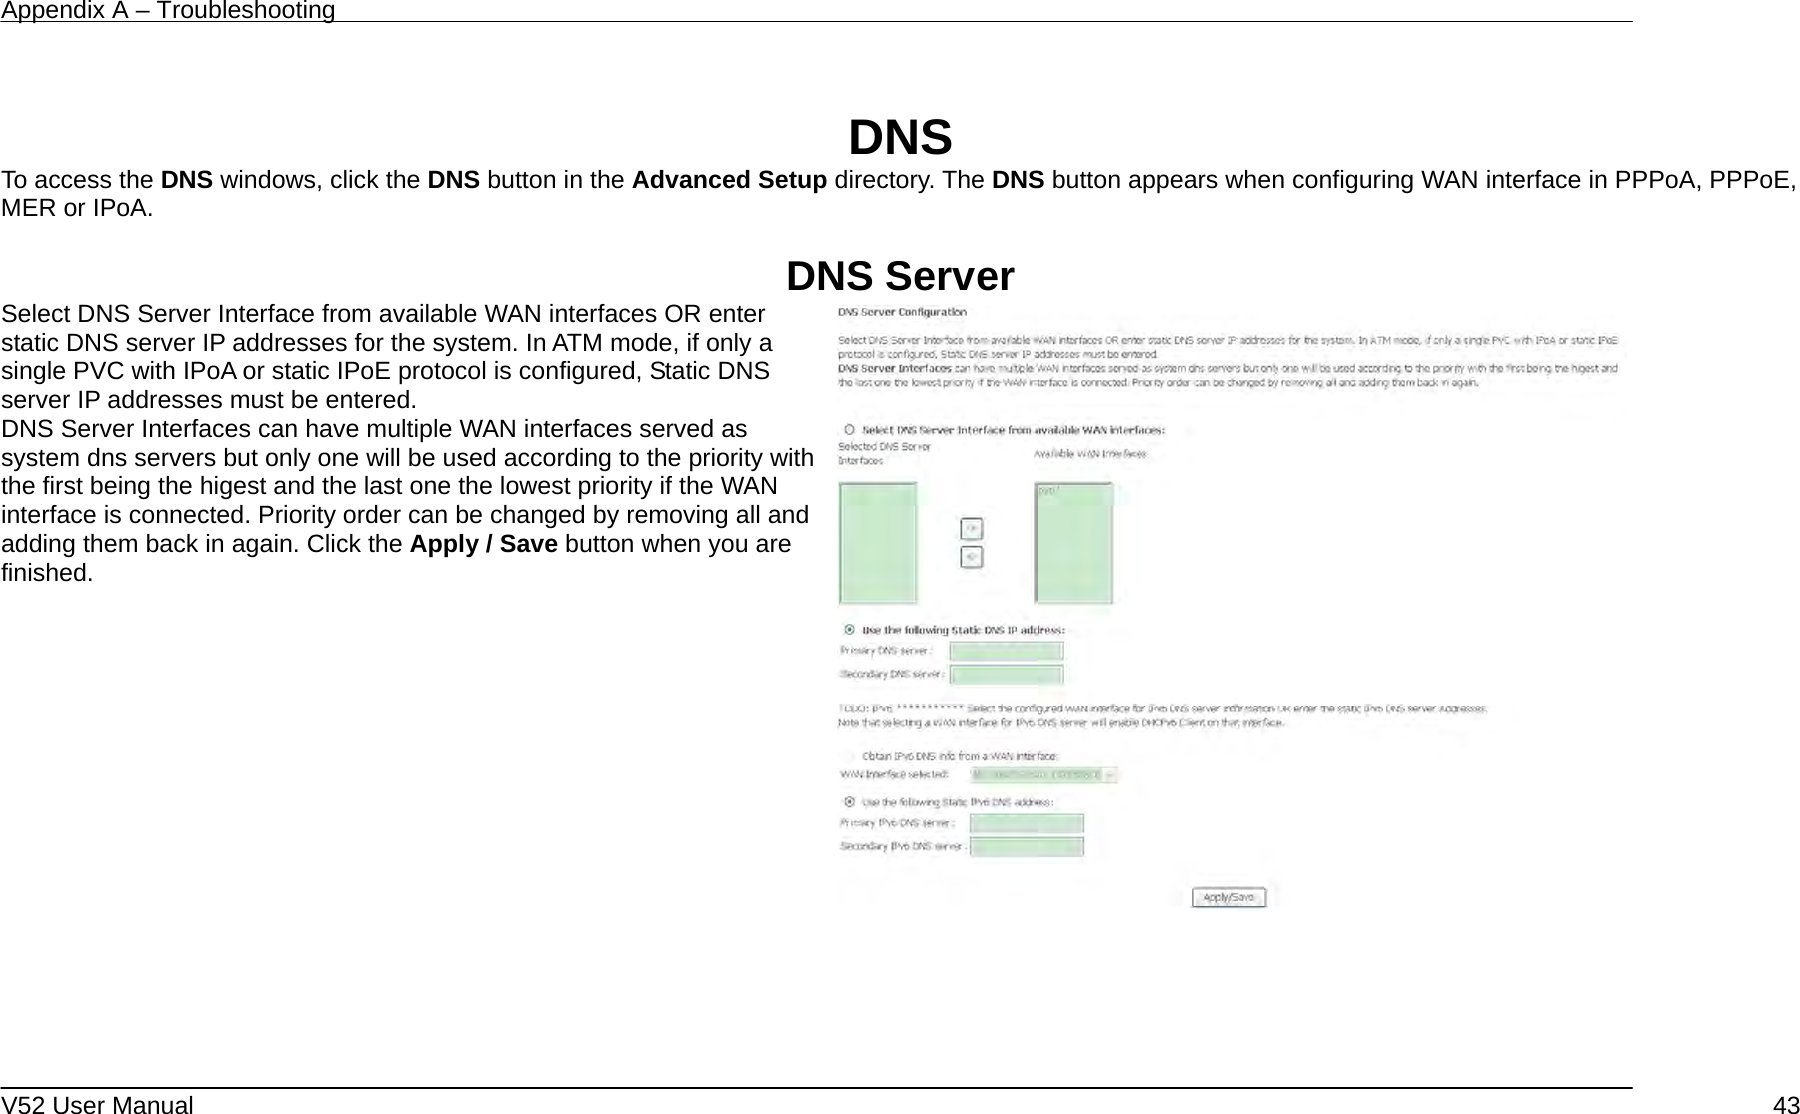 Appendix A – Troubleshooting   V52 User Manual    43 DNS To access the DNS windows, click the DNS button in the Advanced Setup directory. The DNS button appears when configuring WAN interface in PPPoA, PPPoE, MER or IPoA.  DNS Server Select DNS Server Interface from available WAN interfaces OR enter static DNS server IP addresses for the system. In ATM mode, if only a single PVC with IPoA or static IPoE protocol is configured, Static DNS server IP addresses must be entered. DNS Server Interfaces can have multiple WAN interfaces served as system dns servers but only one will be used according to the priority with the first being the higest and the last one the lowest priority if the WAN interface is connected. Priority order can be changed by removing all and adding them back in again. Click the Apply / Save button when you are finished.      